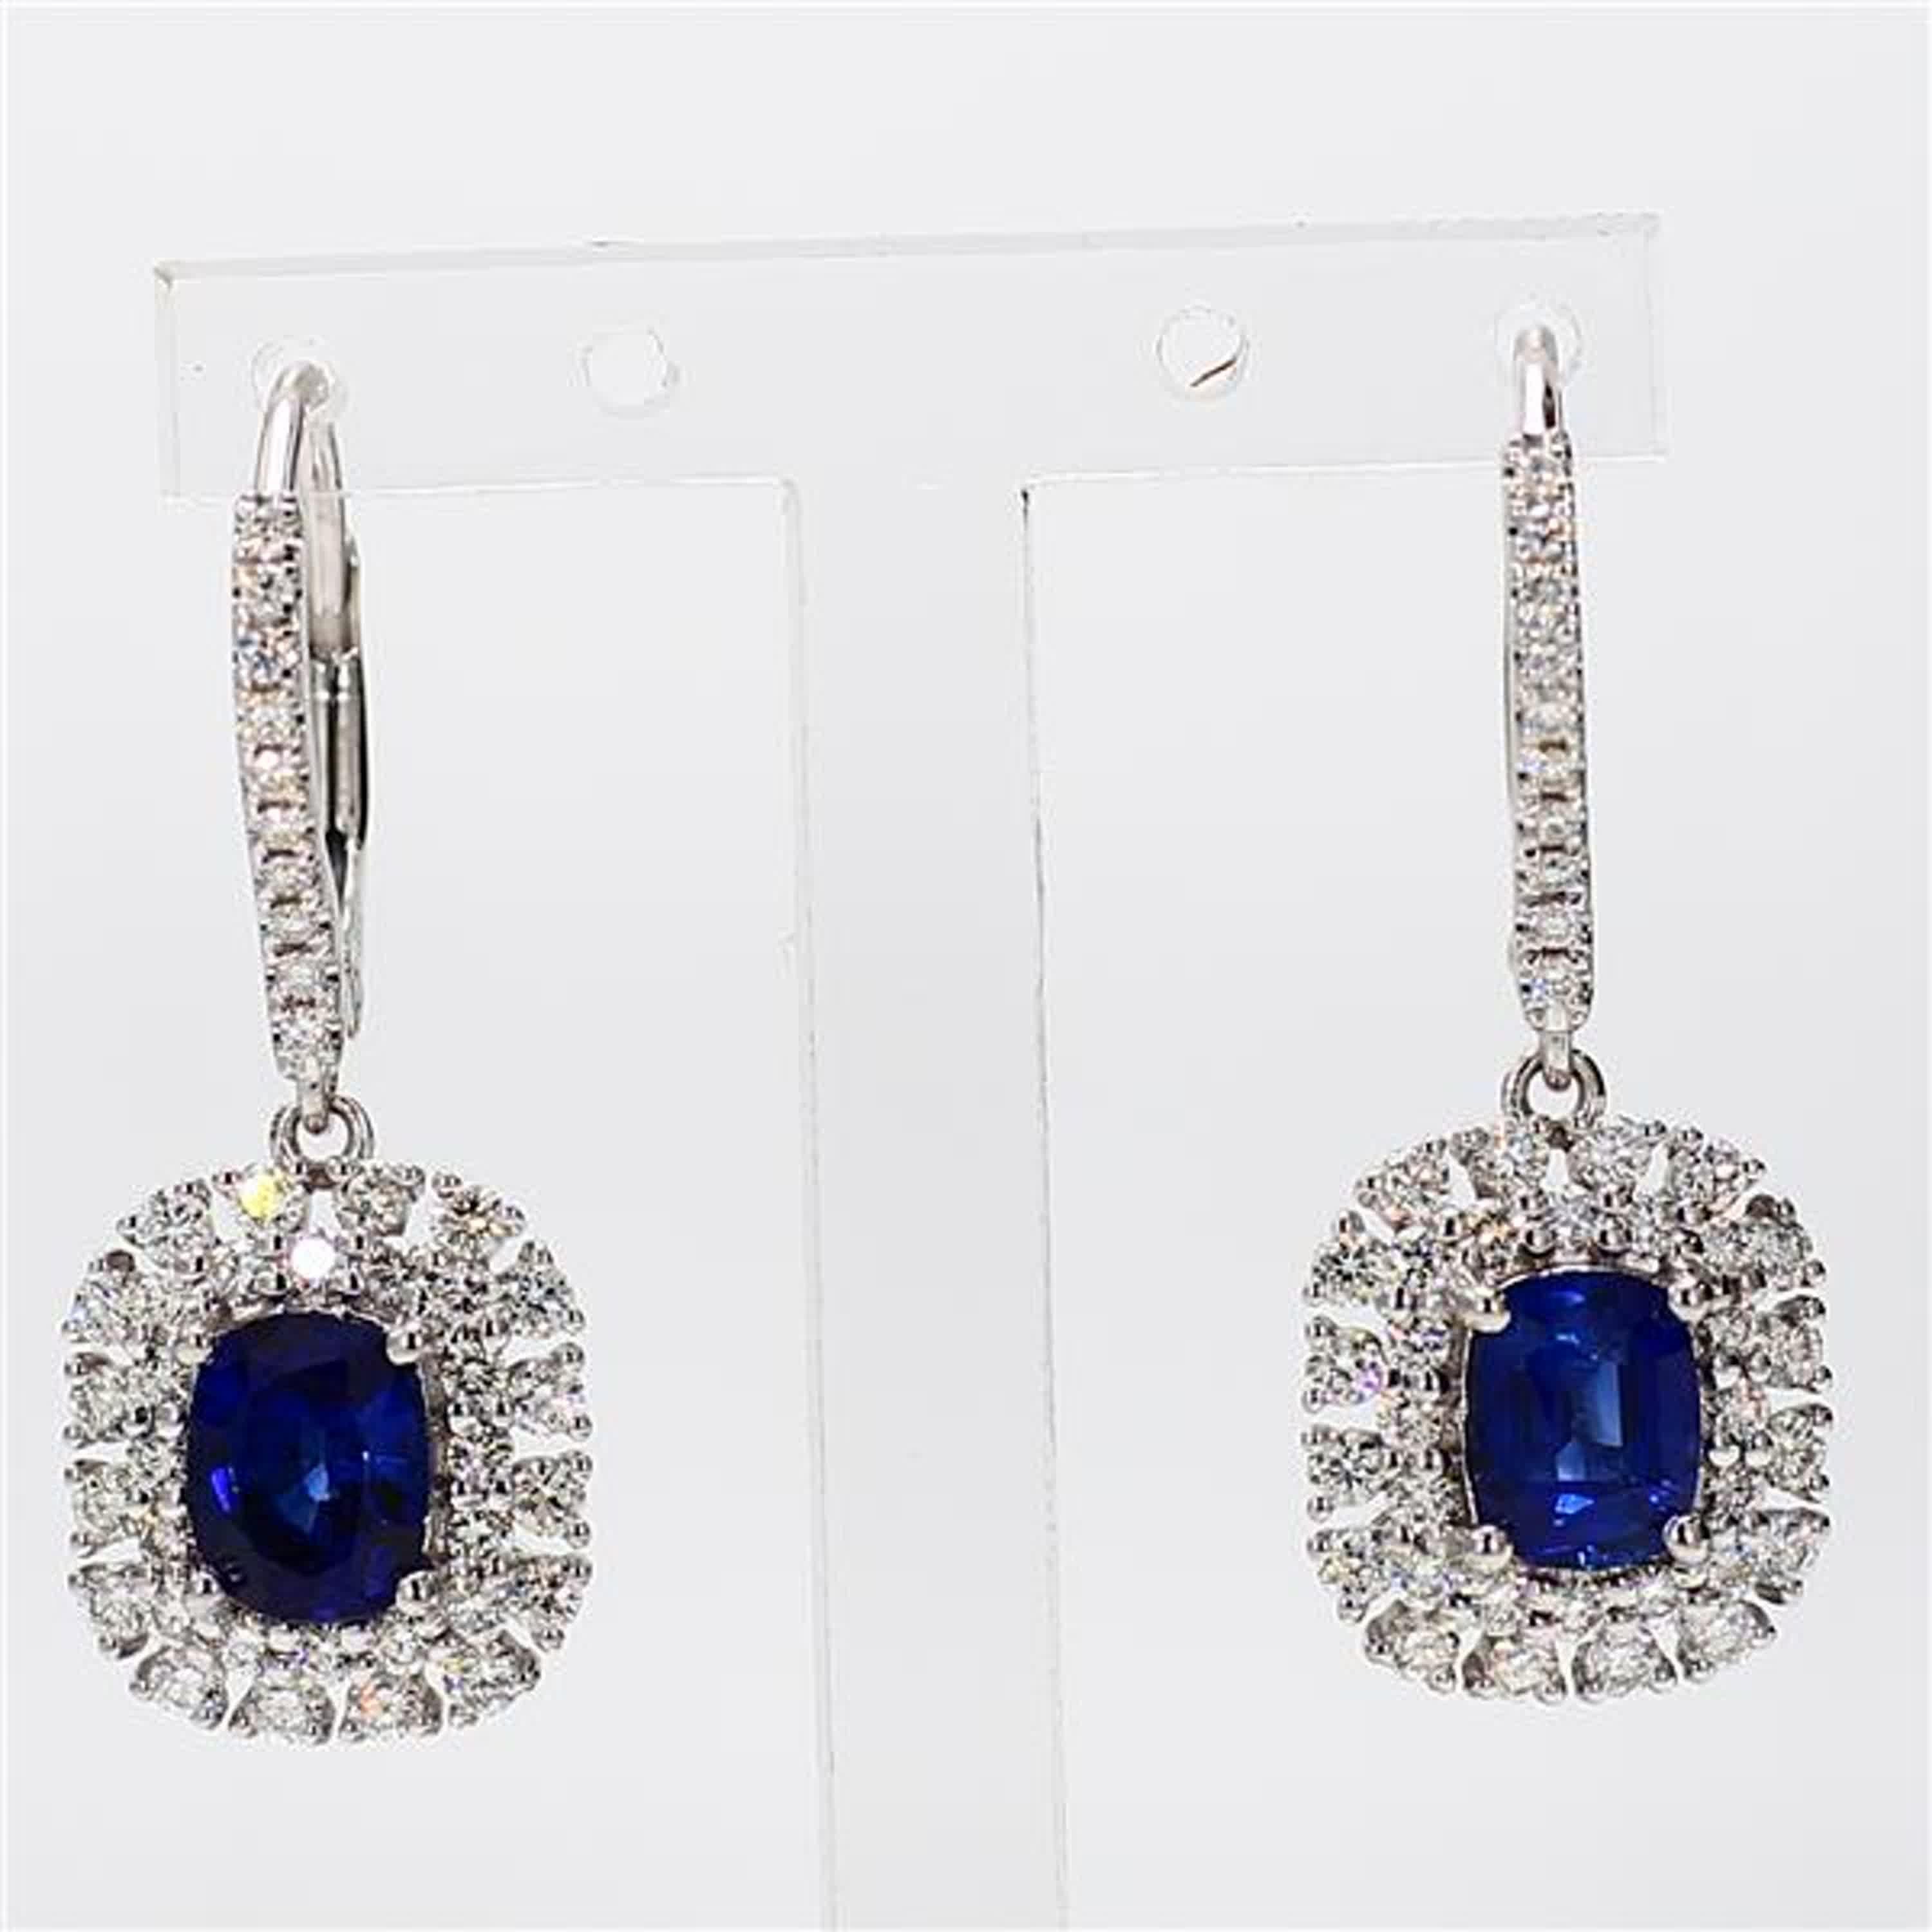 RareGemWorld's classic sapphire earrings. Mounted in a beautiful 18K White Gold setting with natural cushion cut blue sapphires. The sapphires are surrounded by natural round white diamond melee as well as diamonds throughout the earrings. These